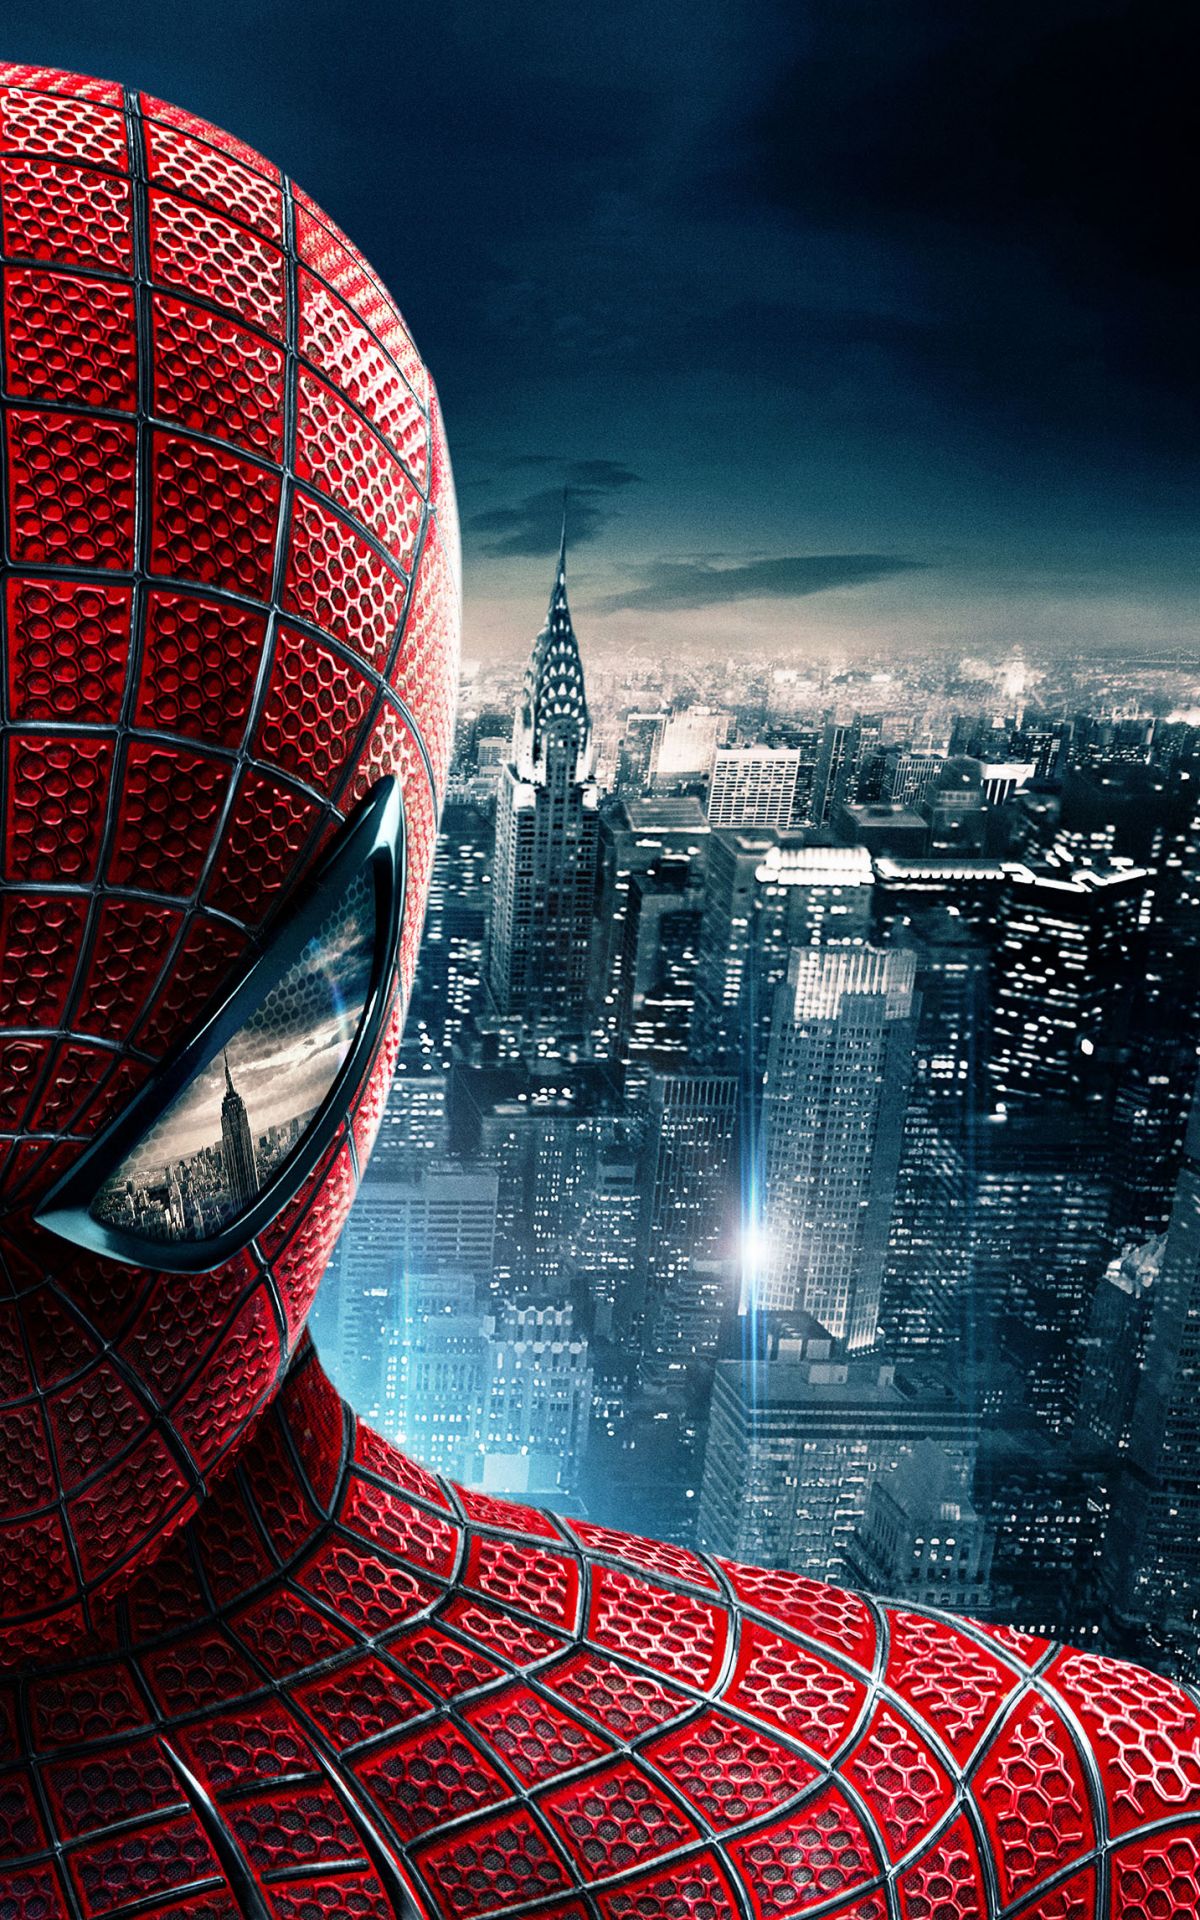 Download mobile wallpaper Spider Man, Movie, Superhero, The Amazing Spider Man for free.